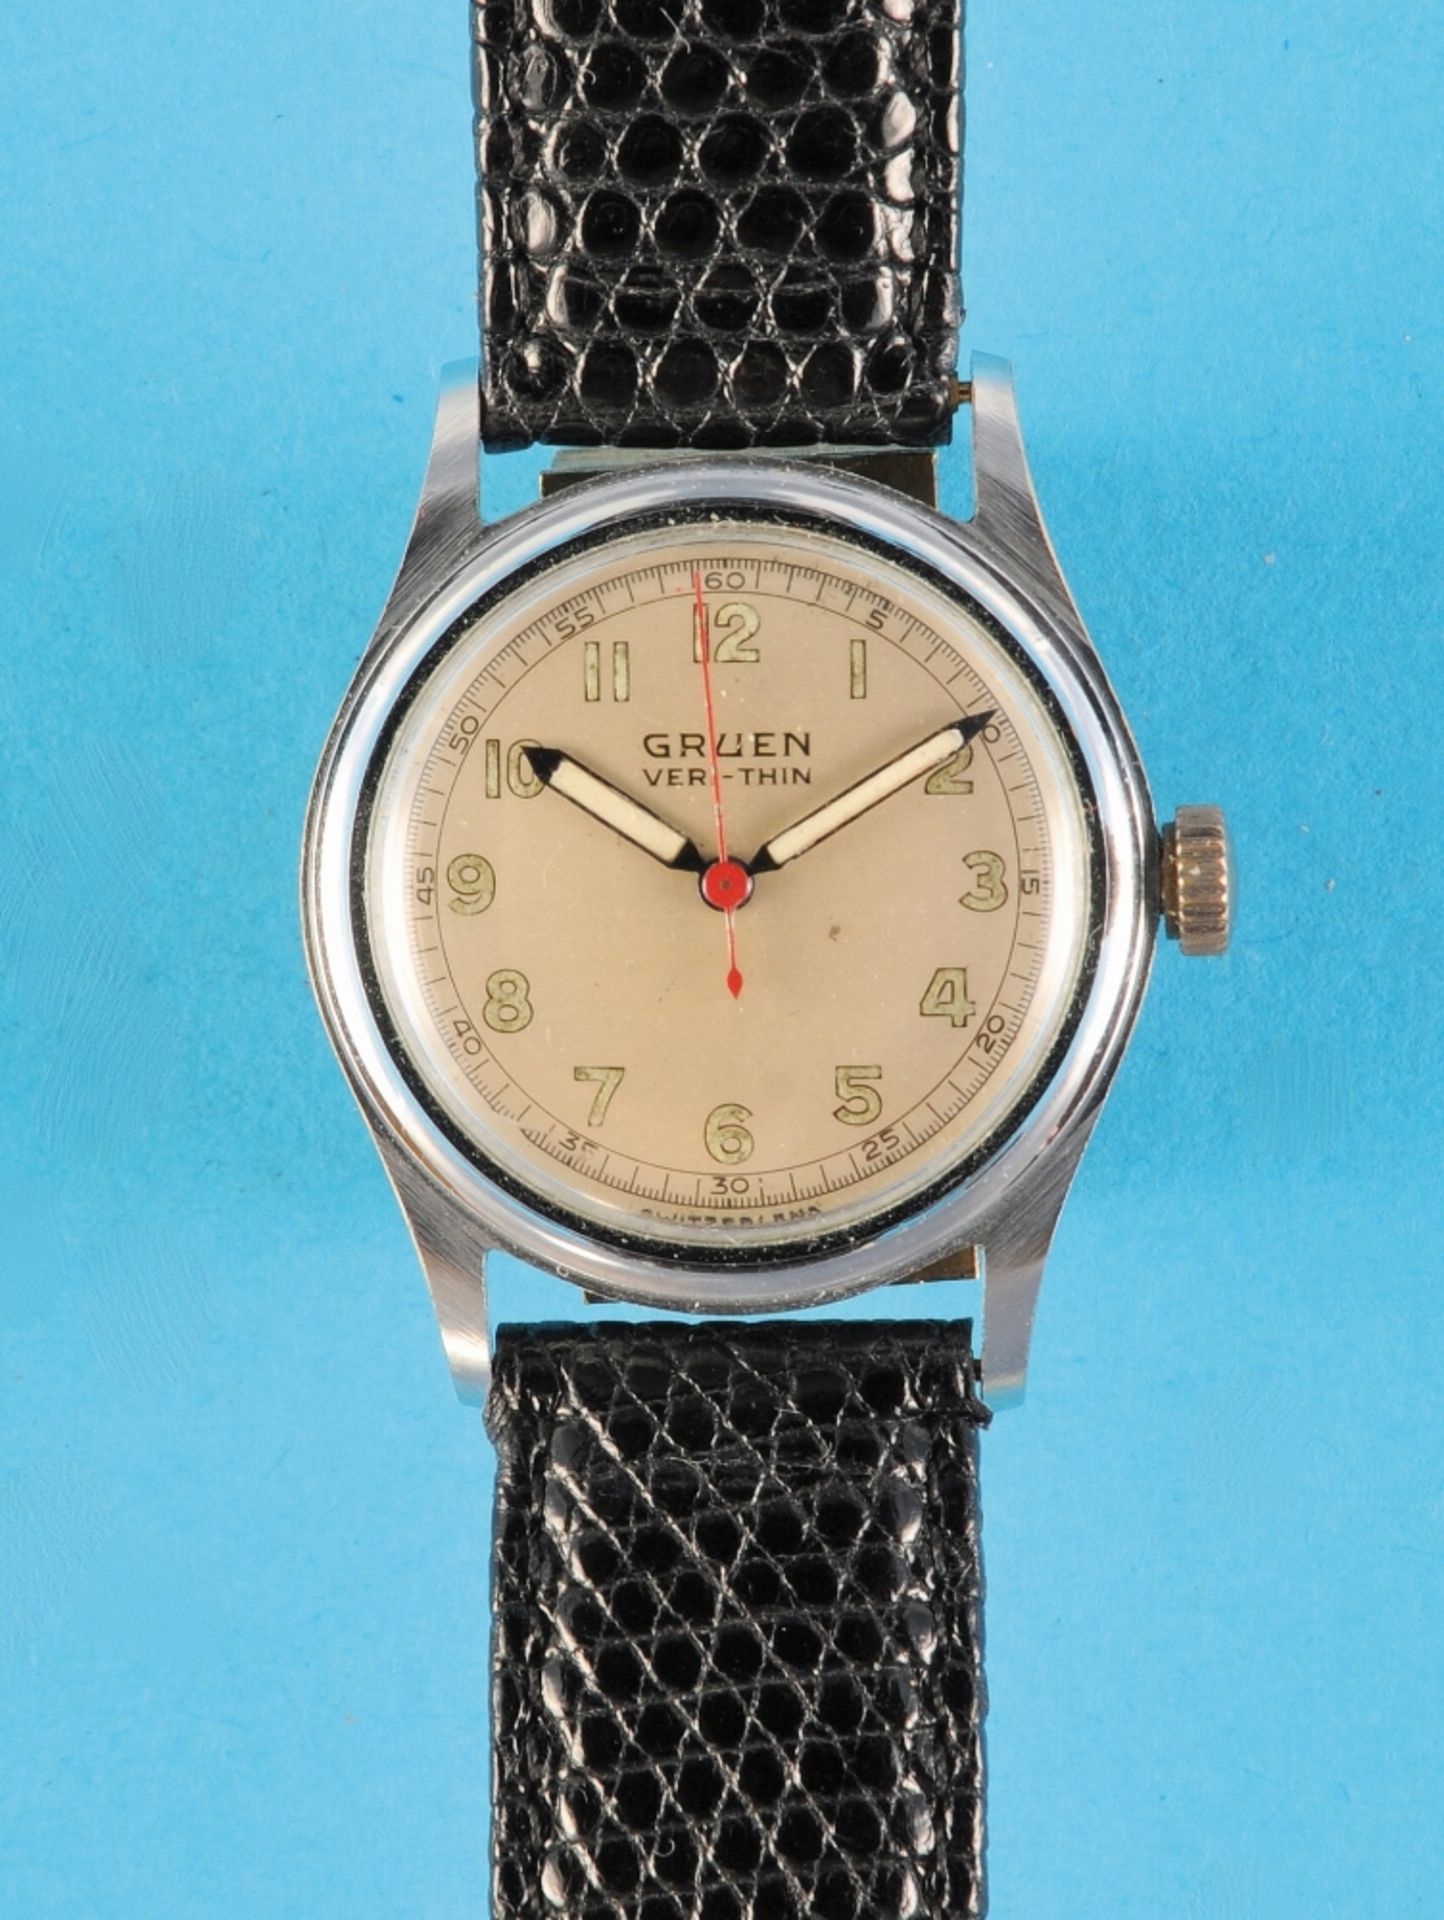 Gruen Watch Co., "Very-Thin Patented", wristwatch with red central second hand, cal. 421SS, ca. 1945